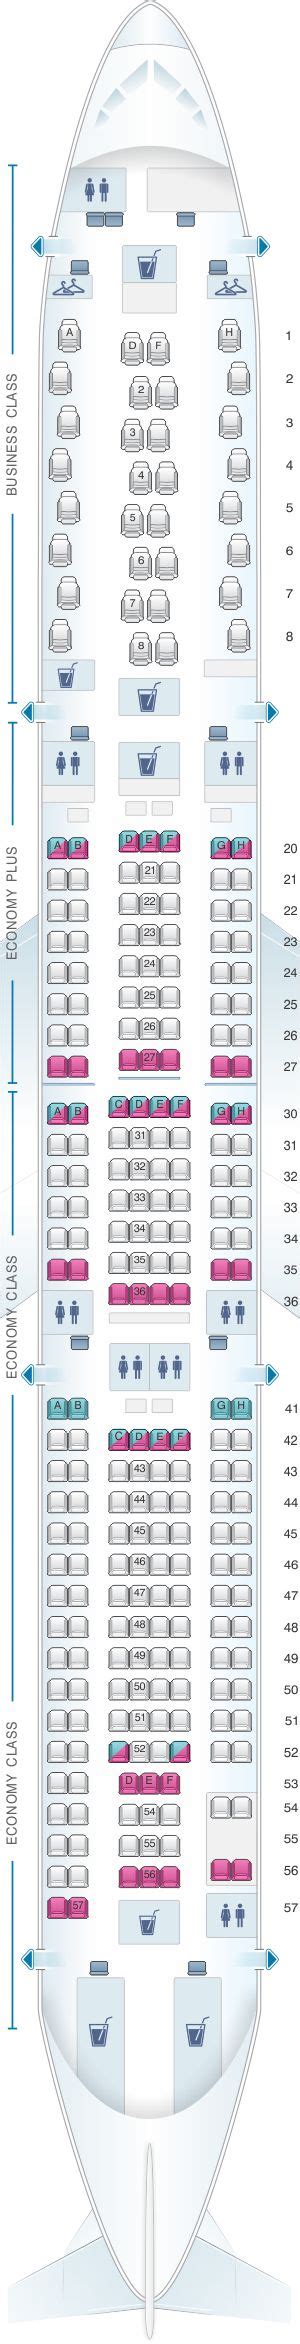 Airbus A330 300 Seating On Pinterest Planes Airplanes And Planes In